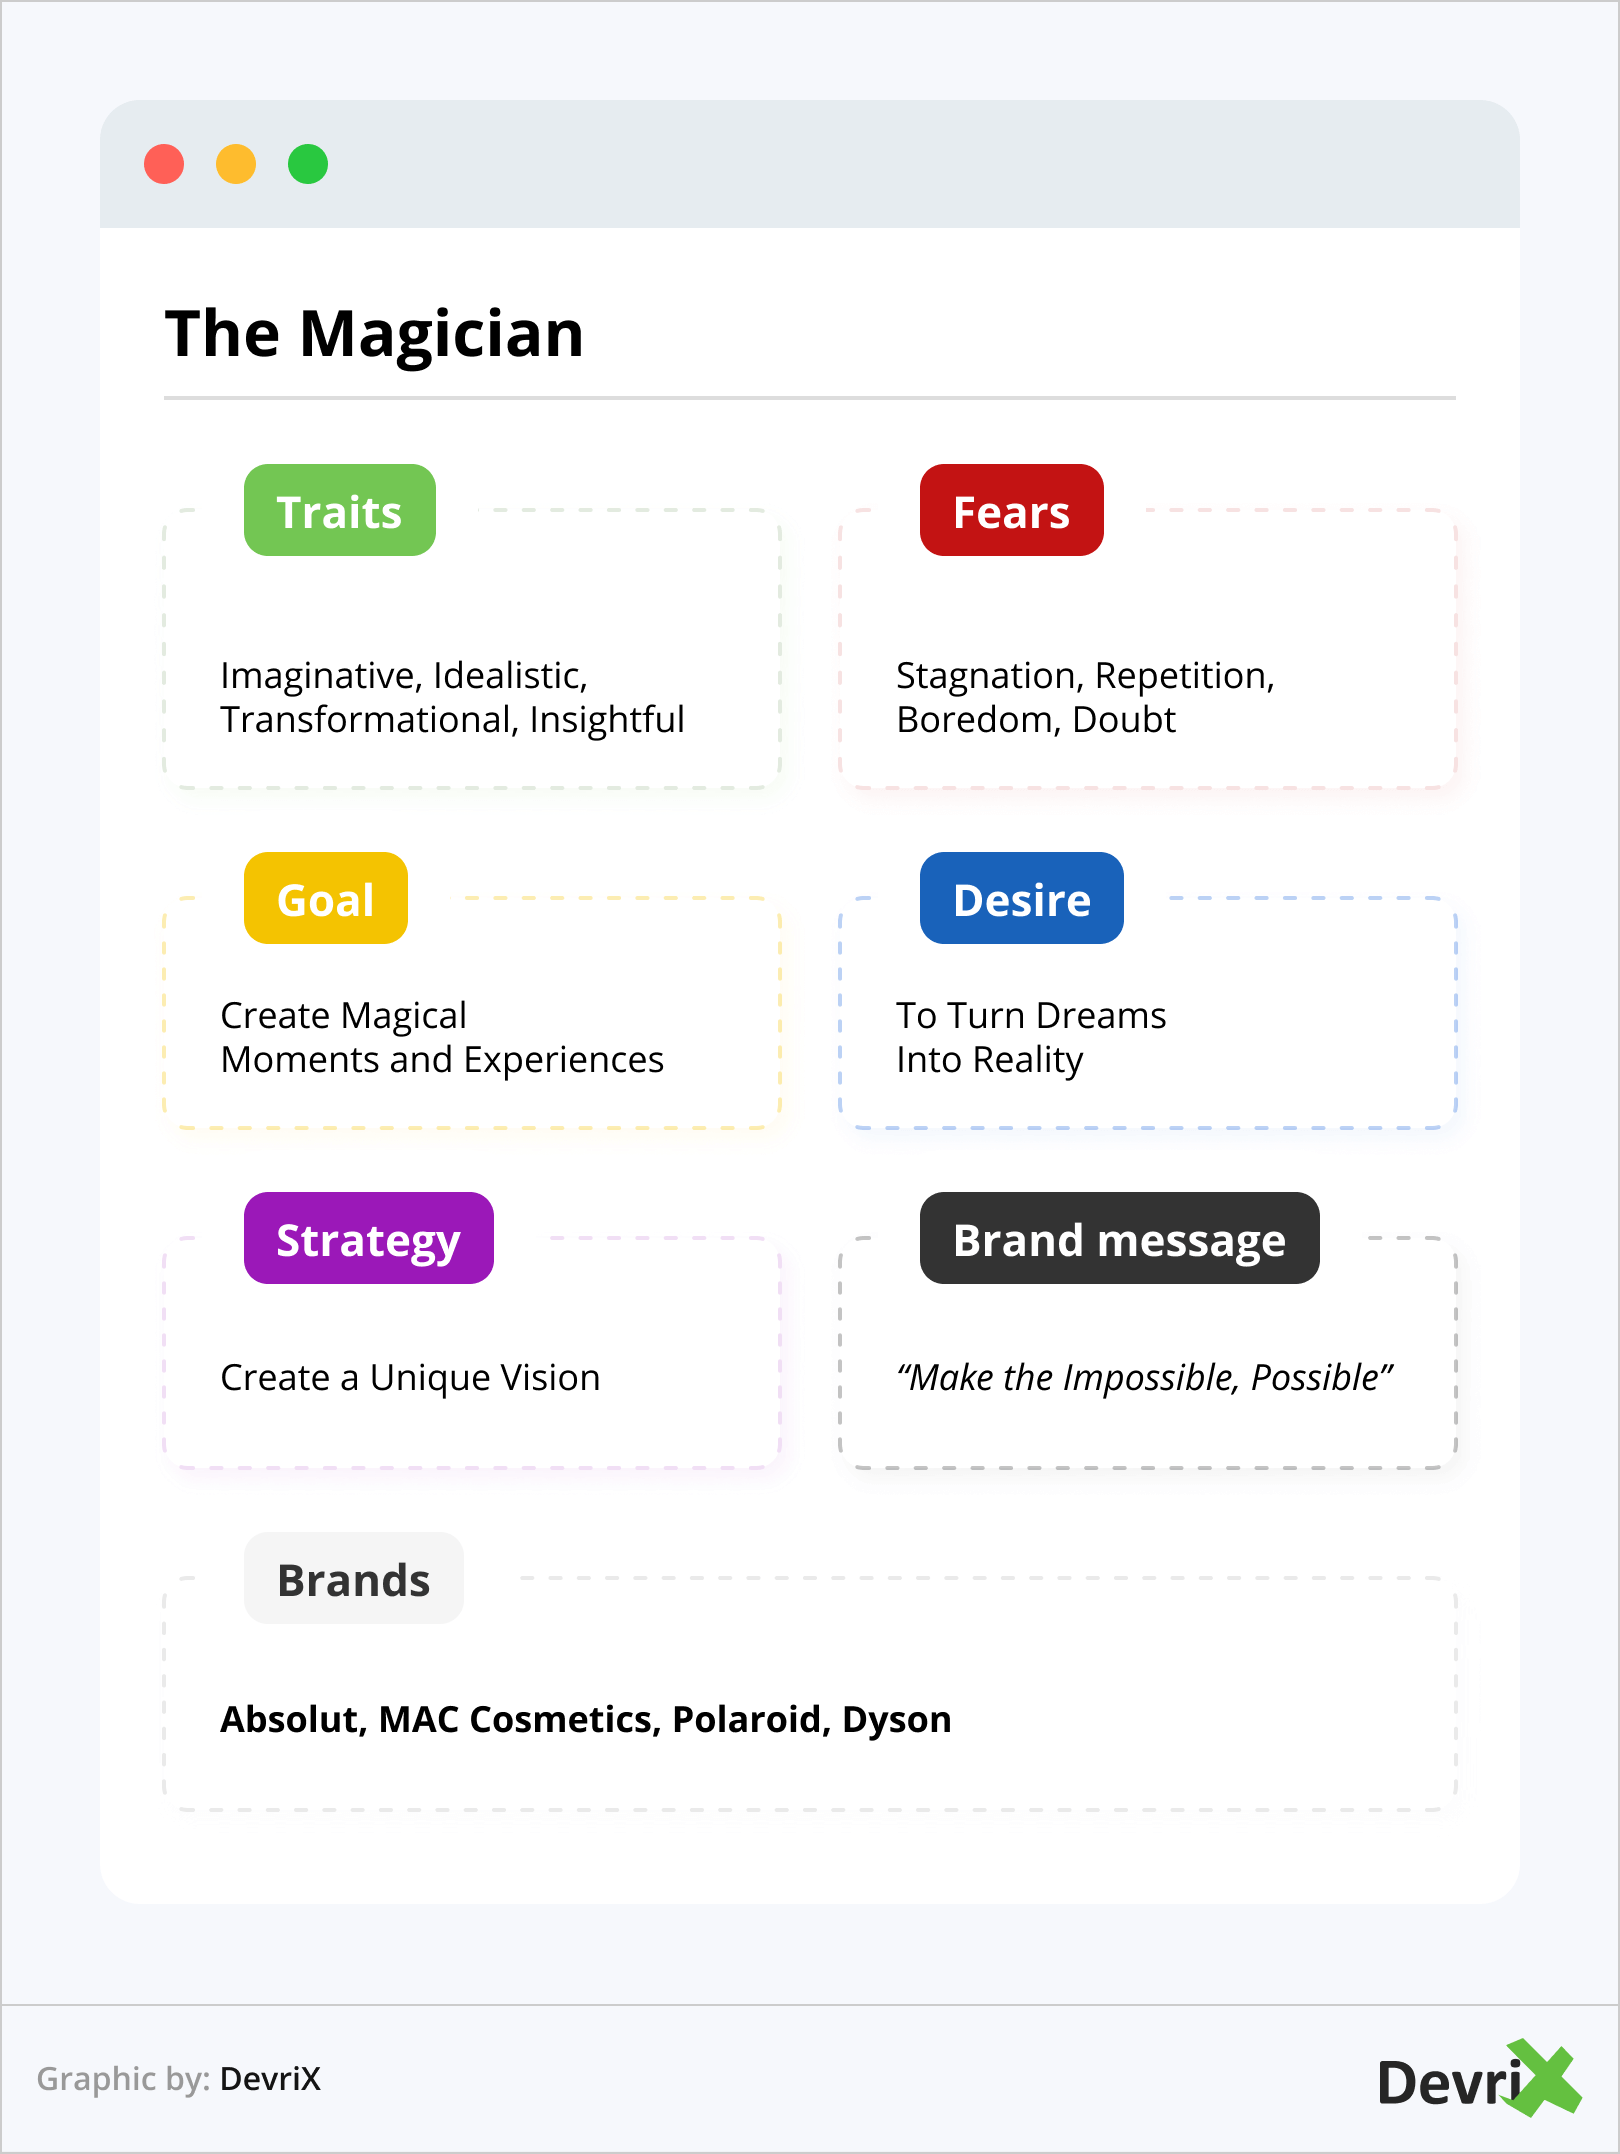 Brand Archetype - The Magician